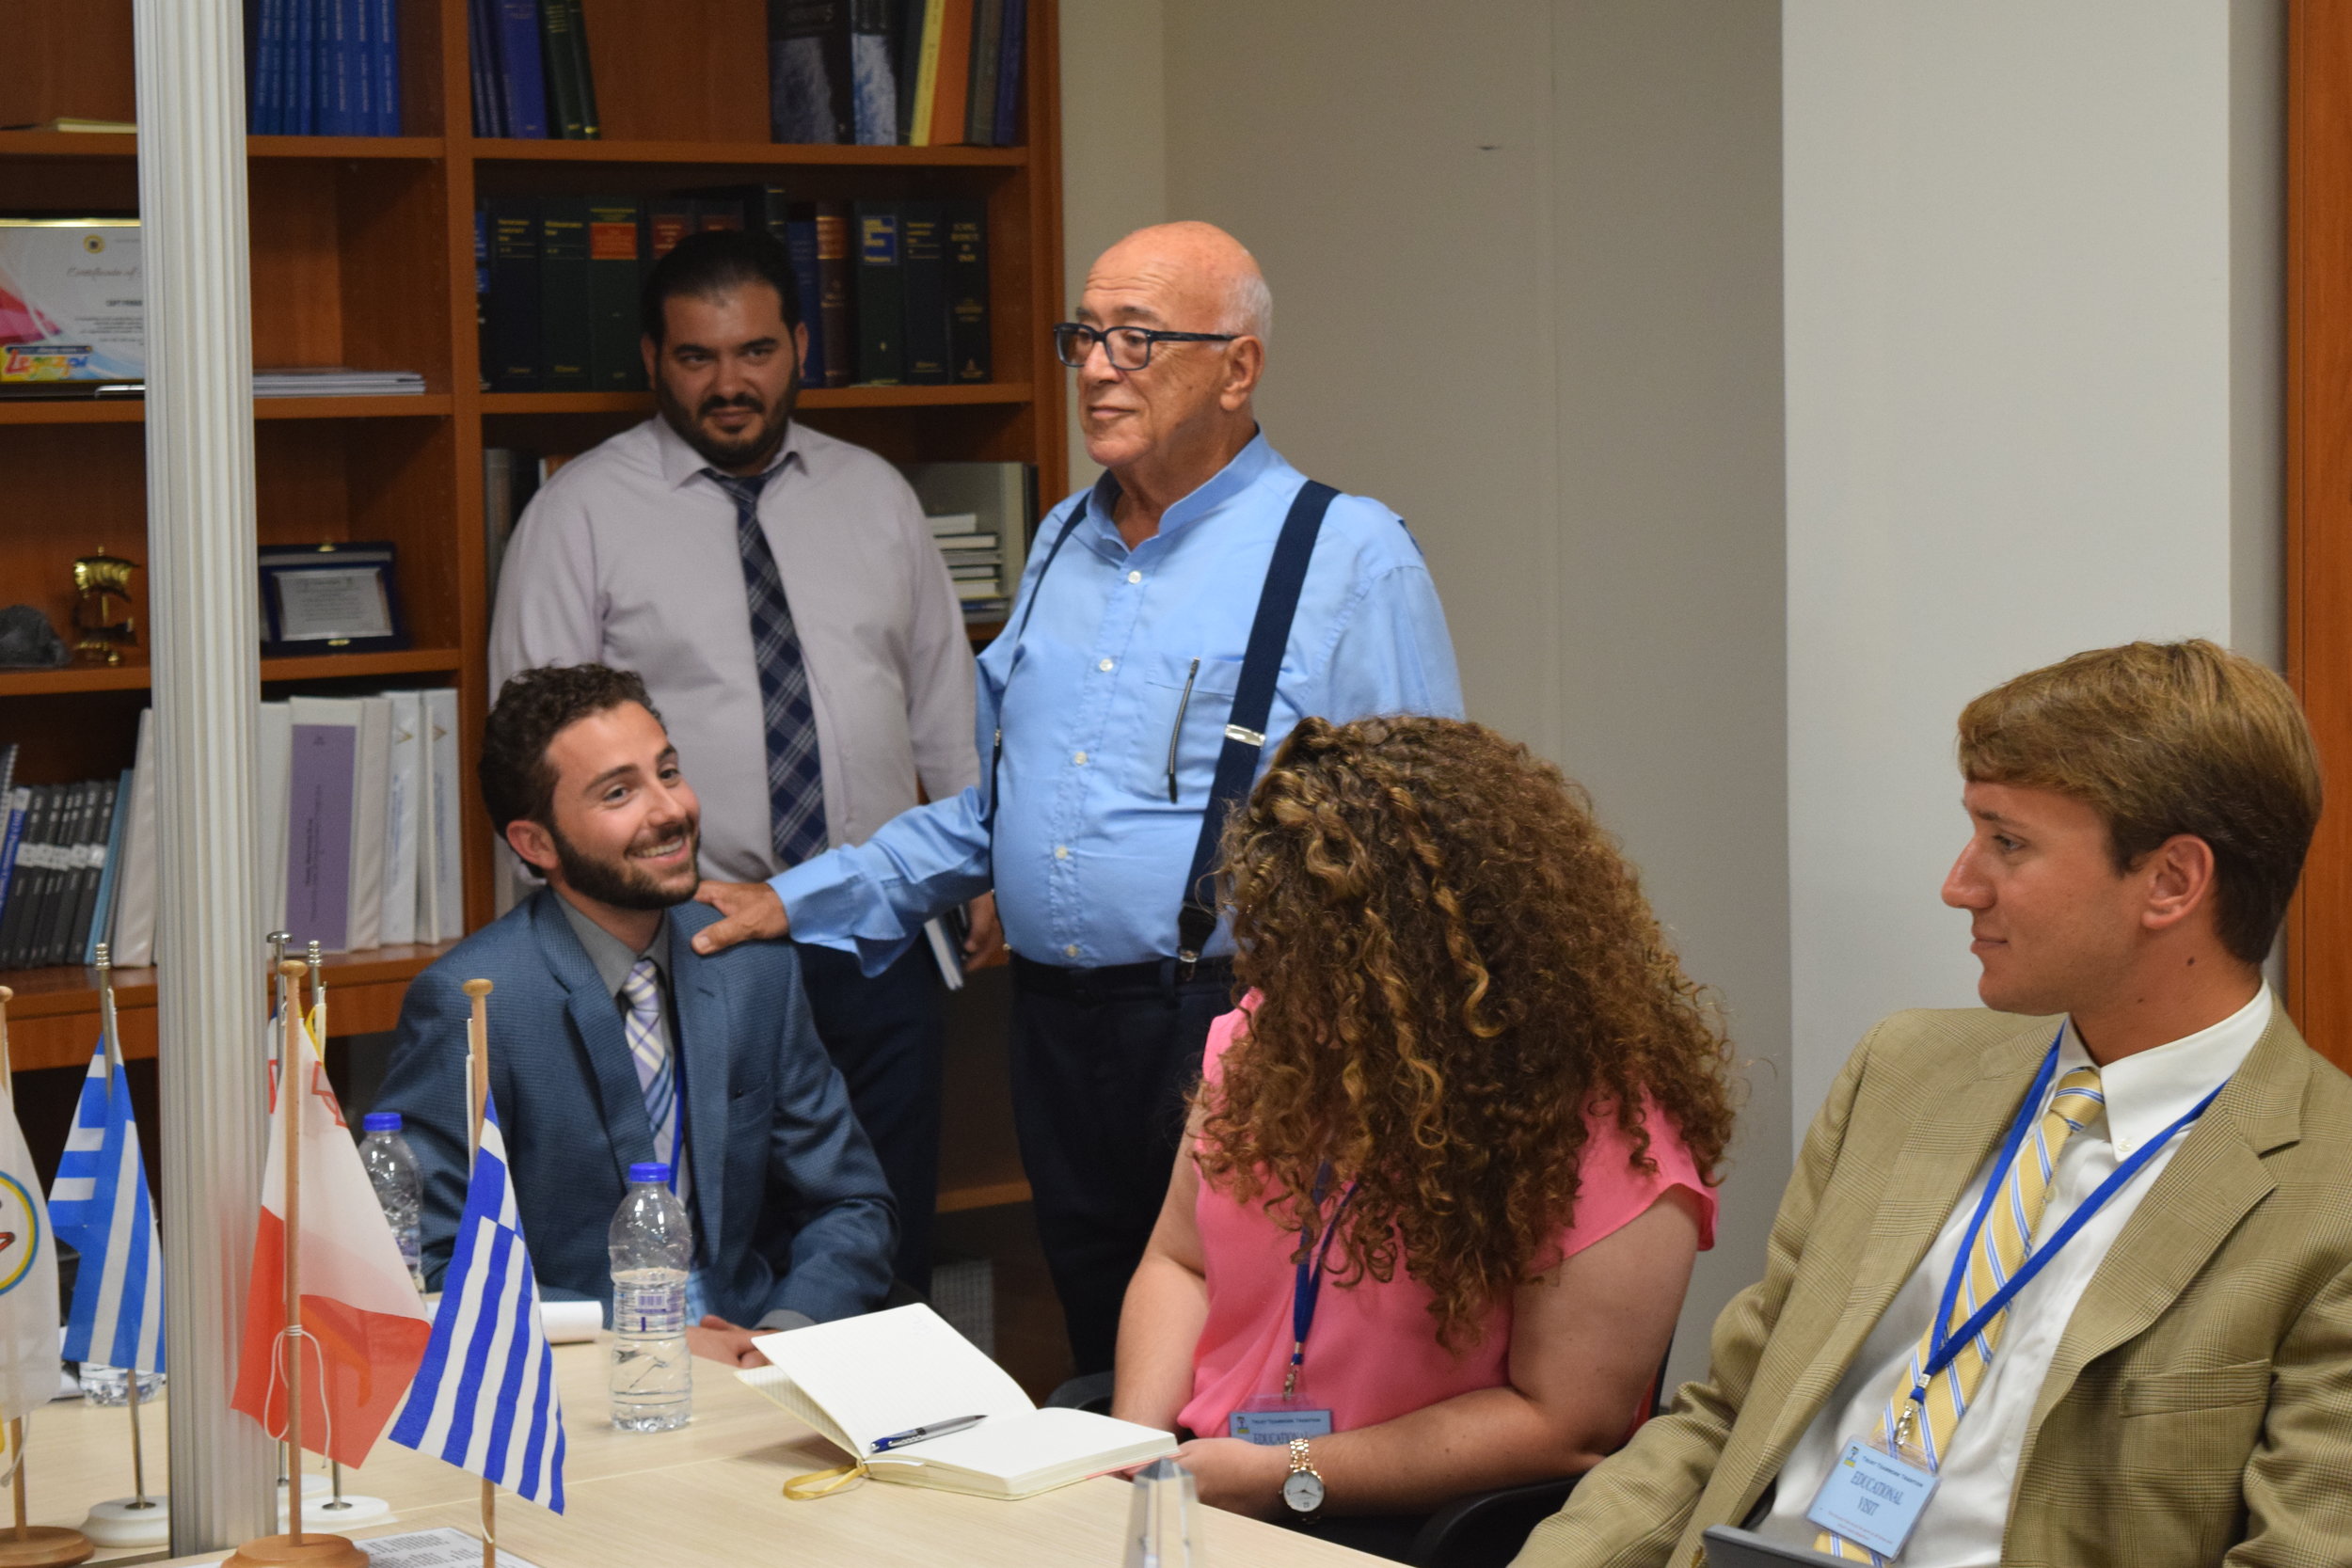  Captain Pangiotis Tsakos, founder of Tsakos Shipping &amp; Trading S.A. talks about the strength of Greek shipping and provides students with successful business advice. 